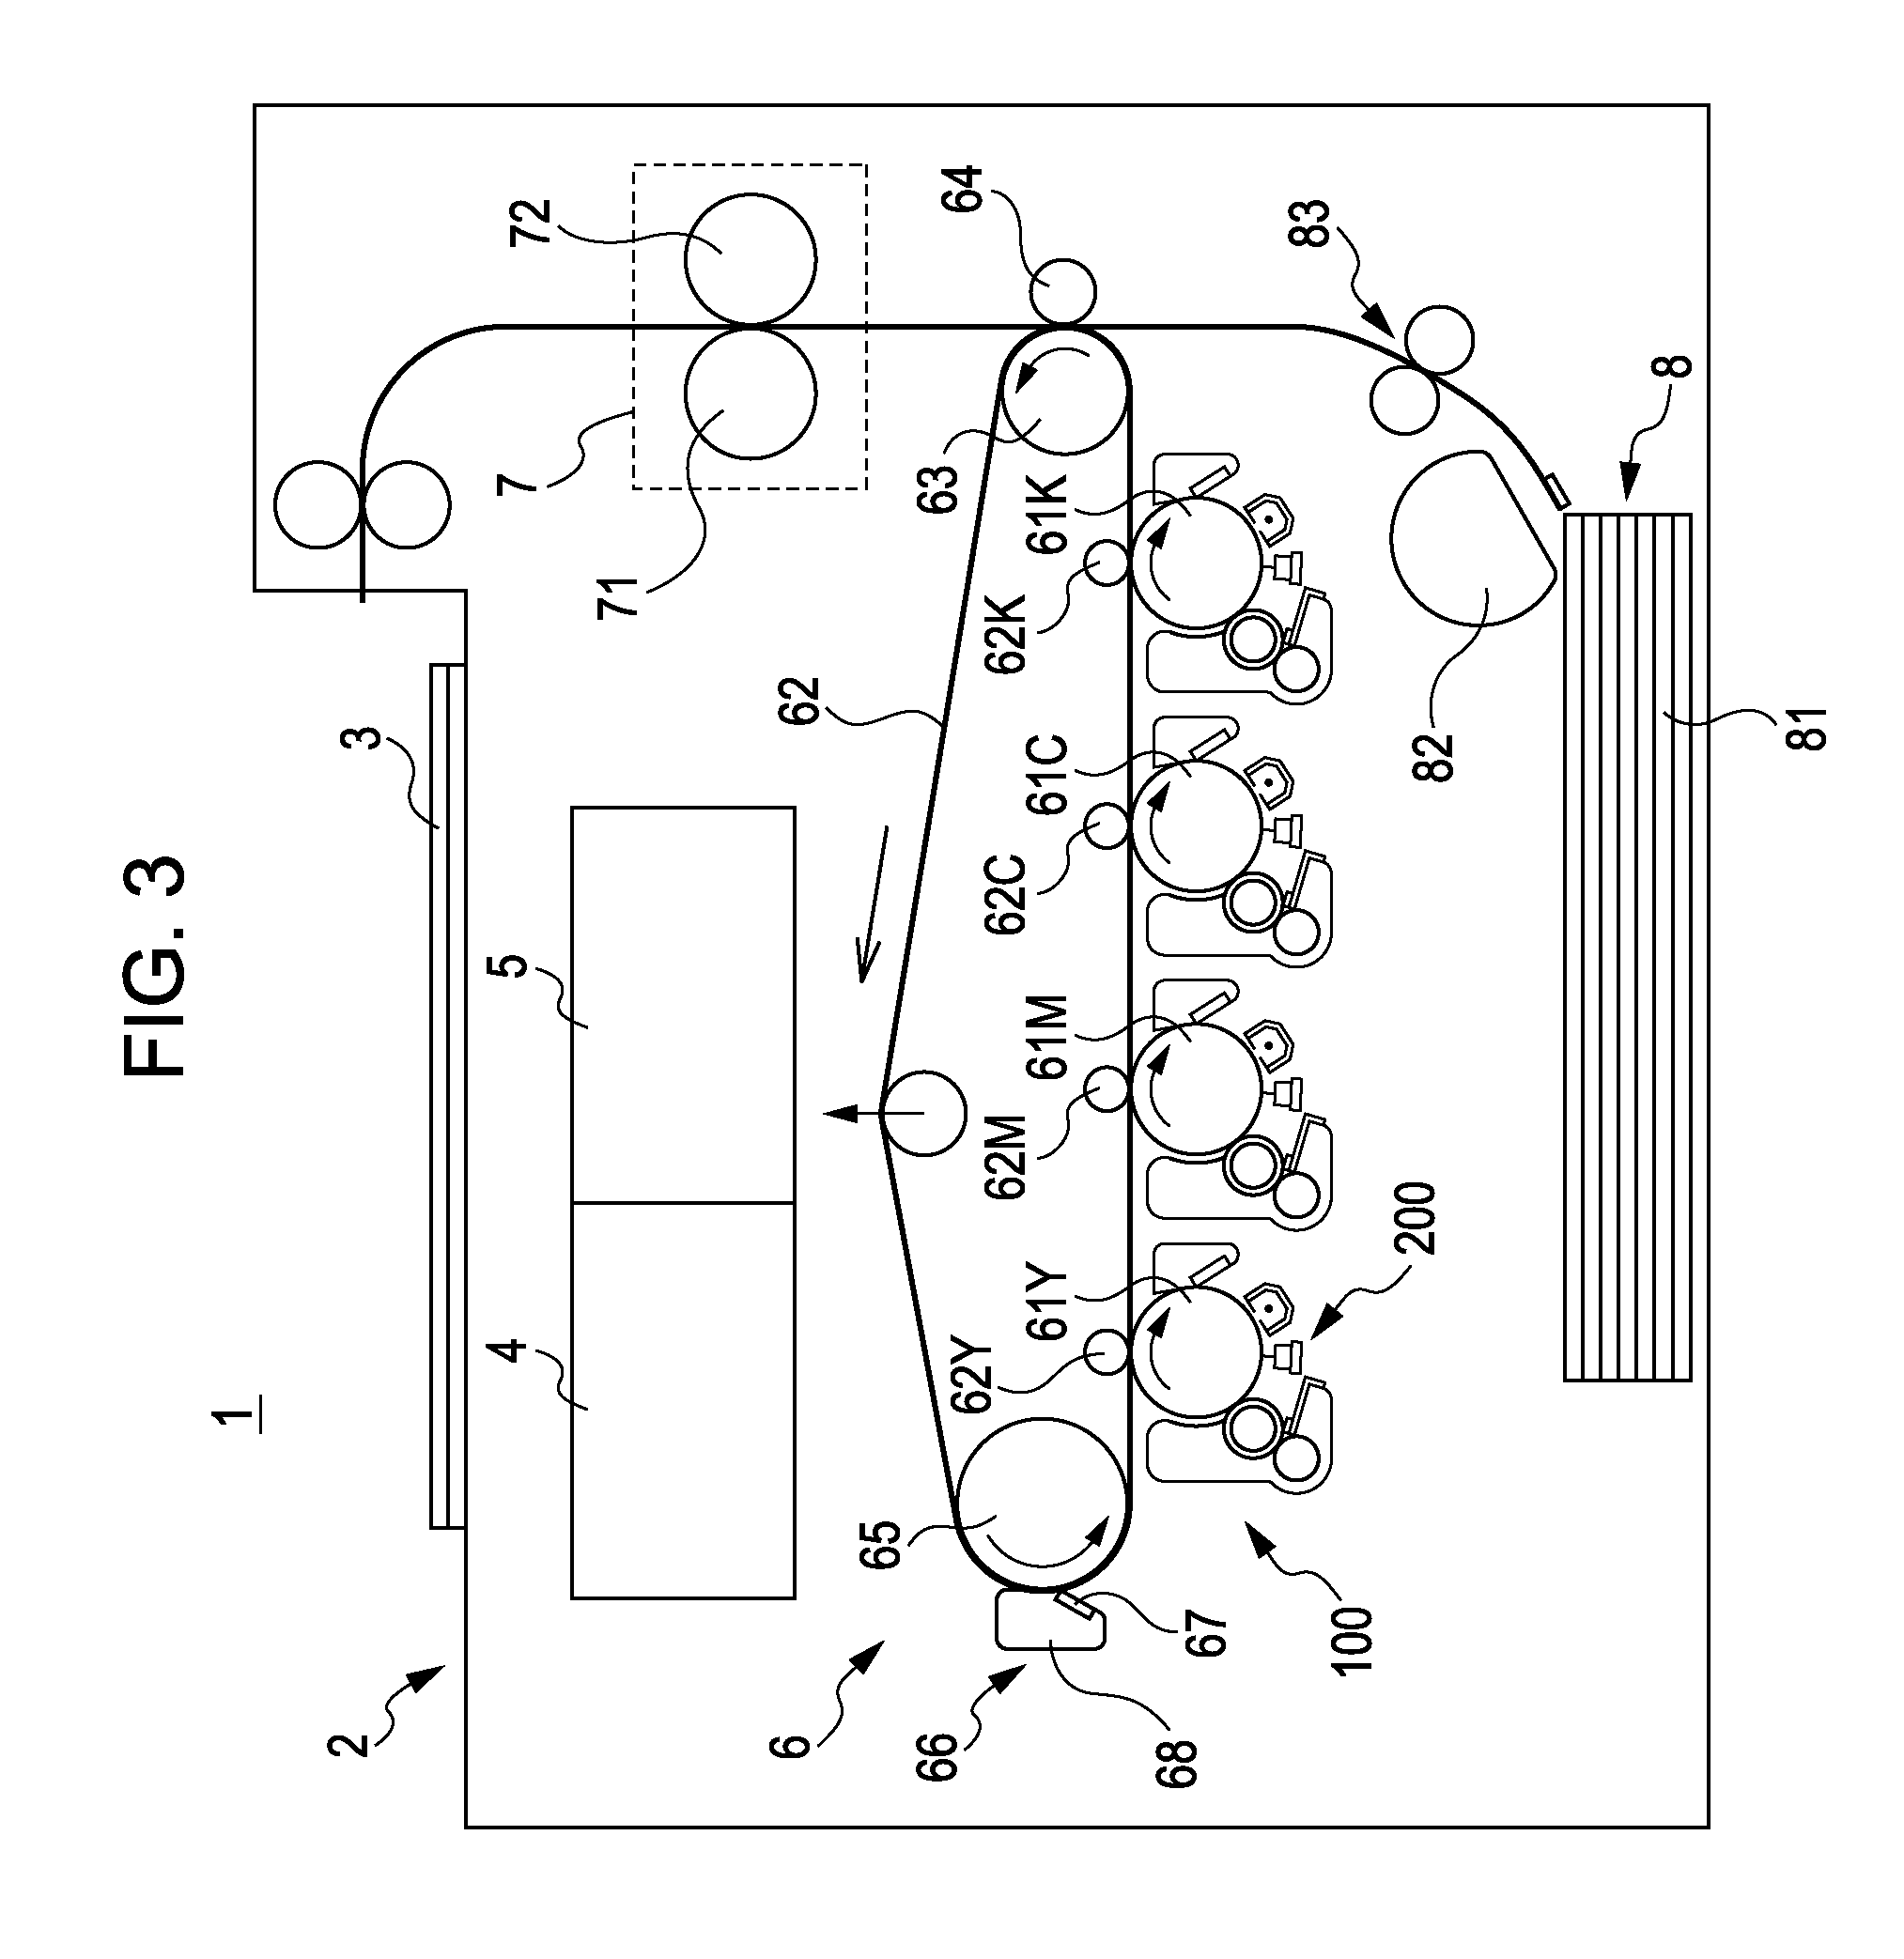 Toner, toner production method, and image forming device using the same